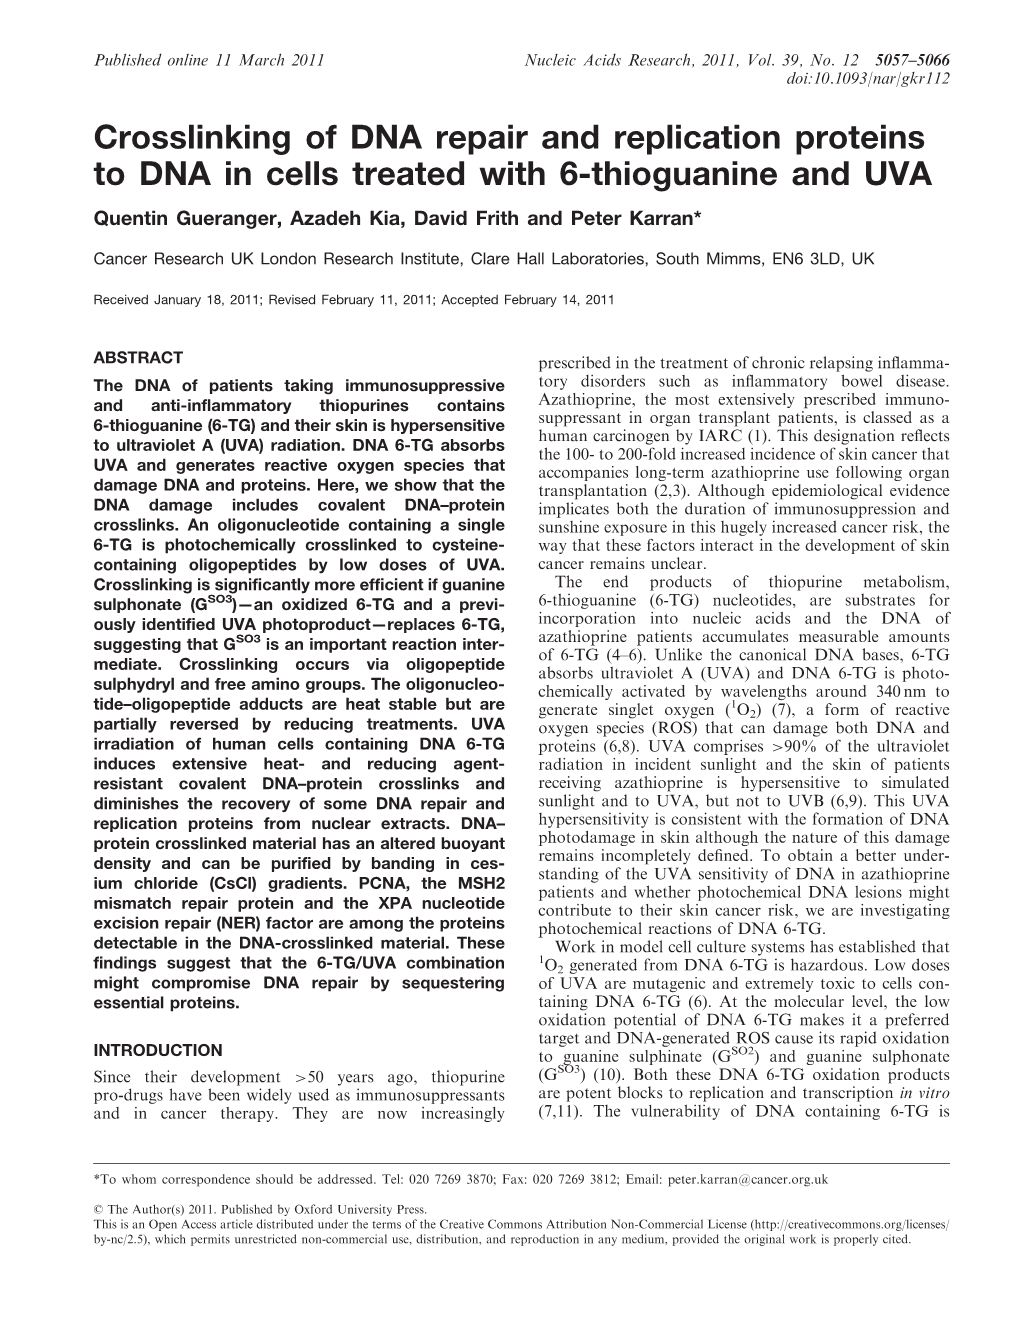 Crosslinking of DNA Repair and Replication Proteins to DNA in Cells Treated with 6-Thioguanine and UVA Quentin Gueranger, Azadeh Kia, David Frith and Peter Karran*